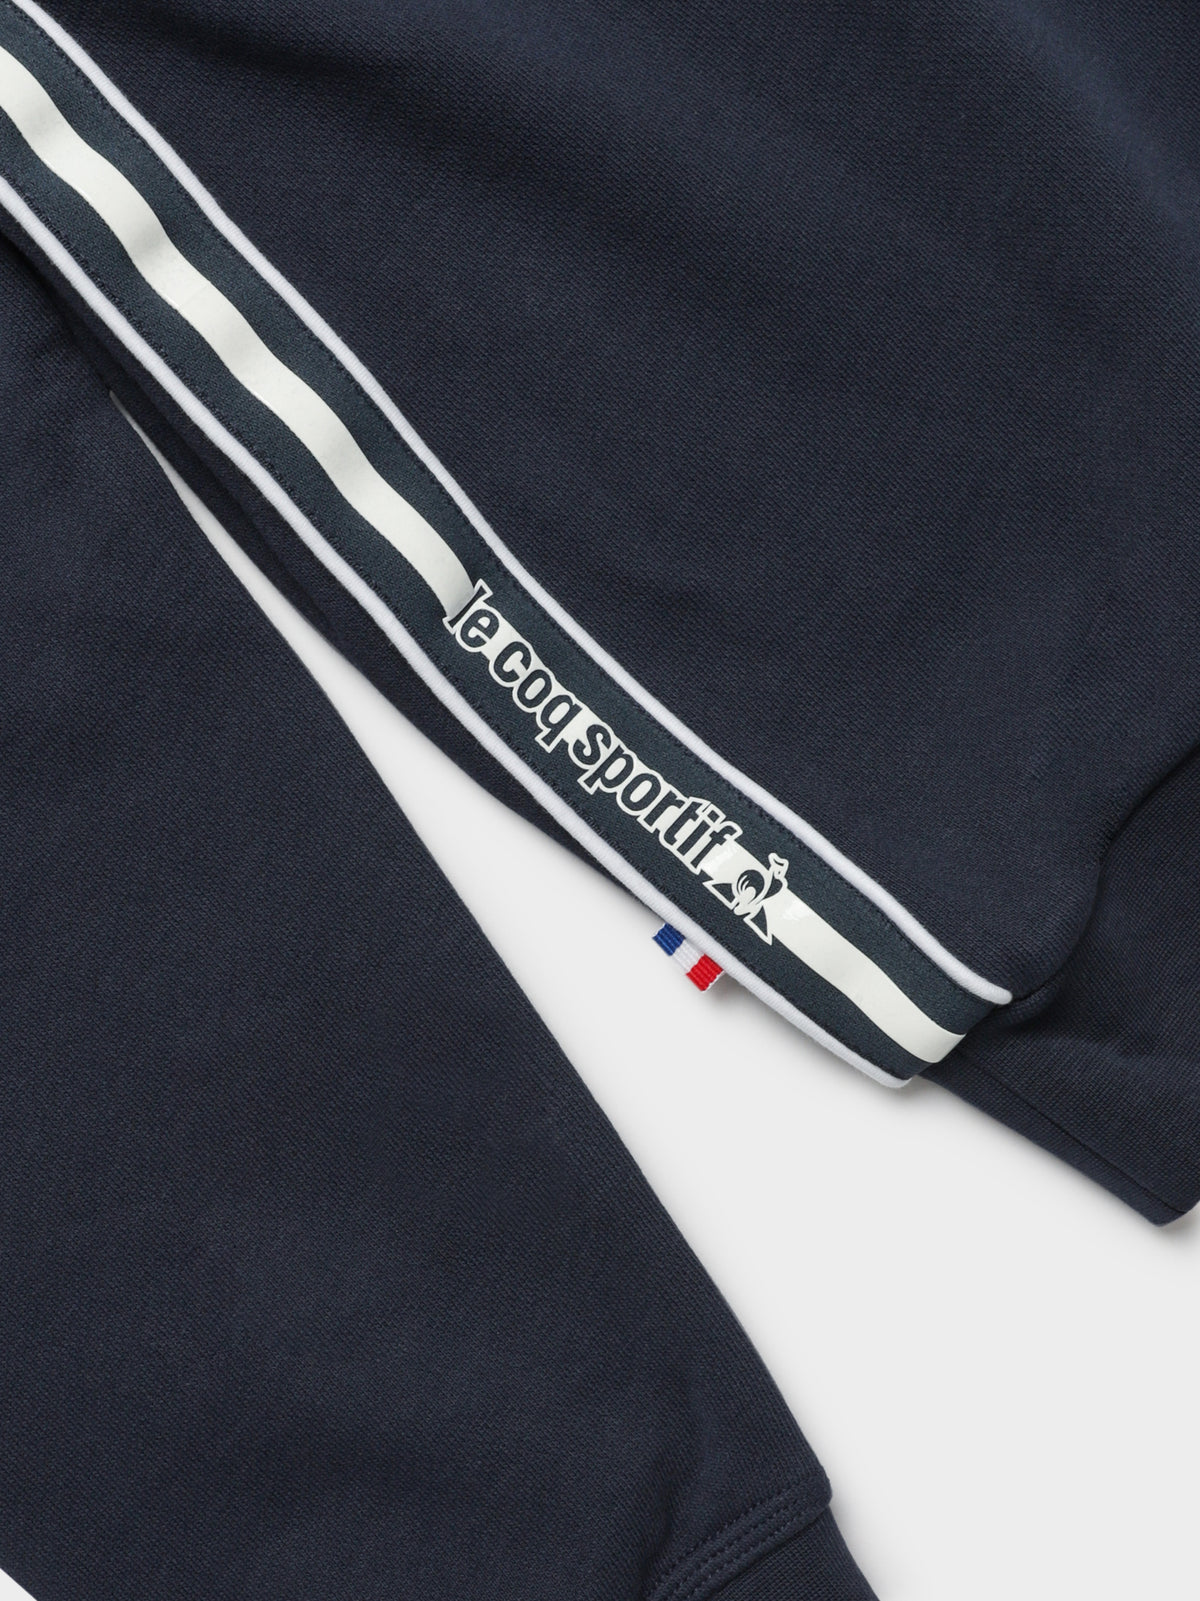 Maison Pullover Sweat in Navy Blue